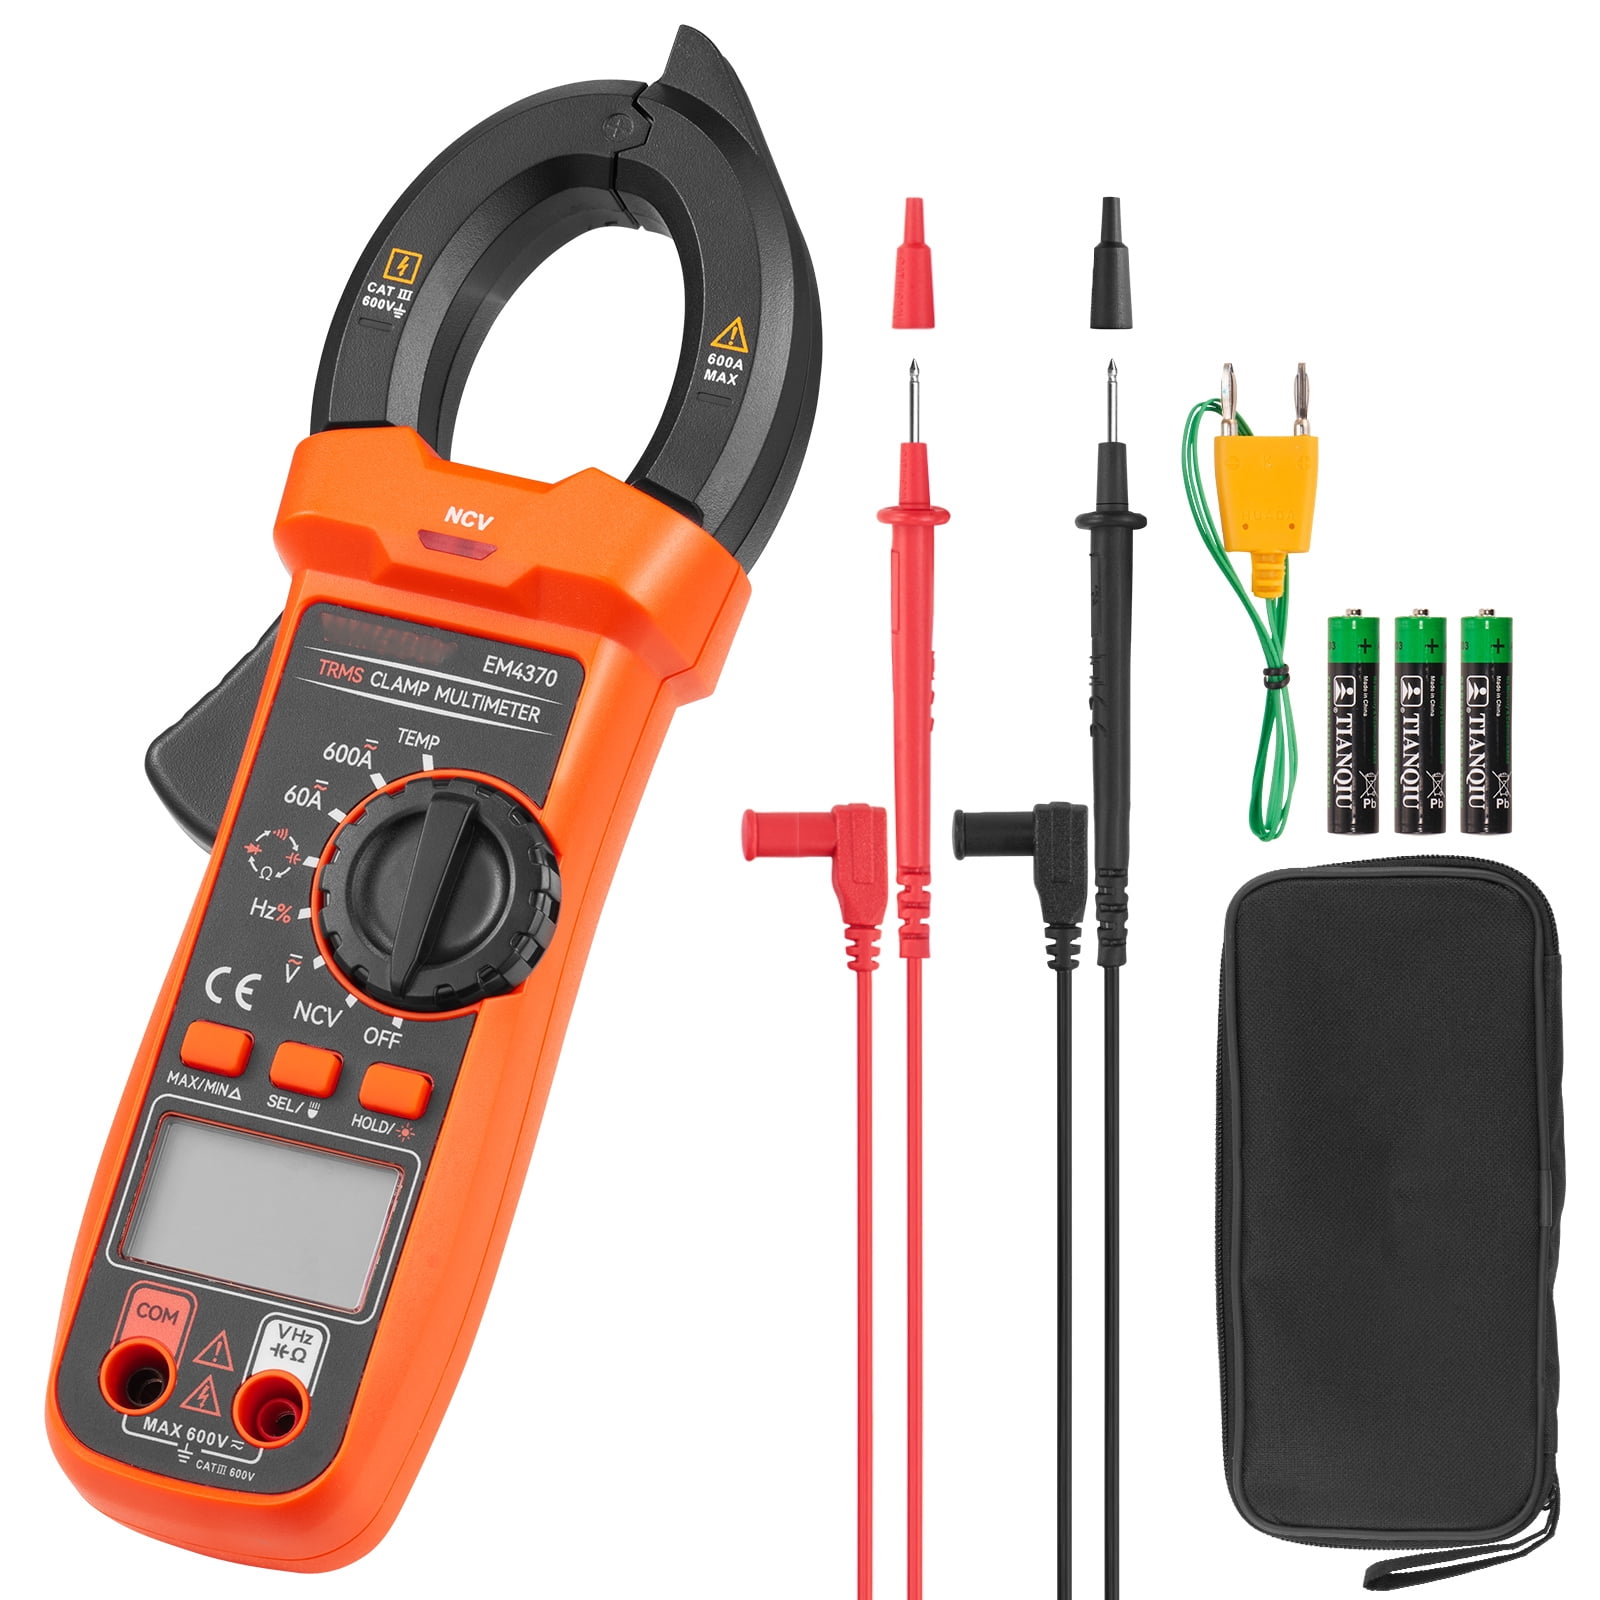 VEVOR Digital Clamp Meter T-RMS, 6000 Counts, 600A Clamp Multimeter Tester,  Measures Current Voltage Resistance Diodes Continuity Data Retention